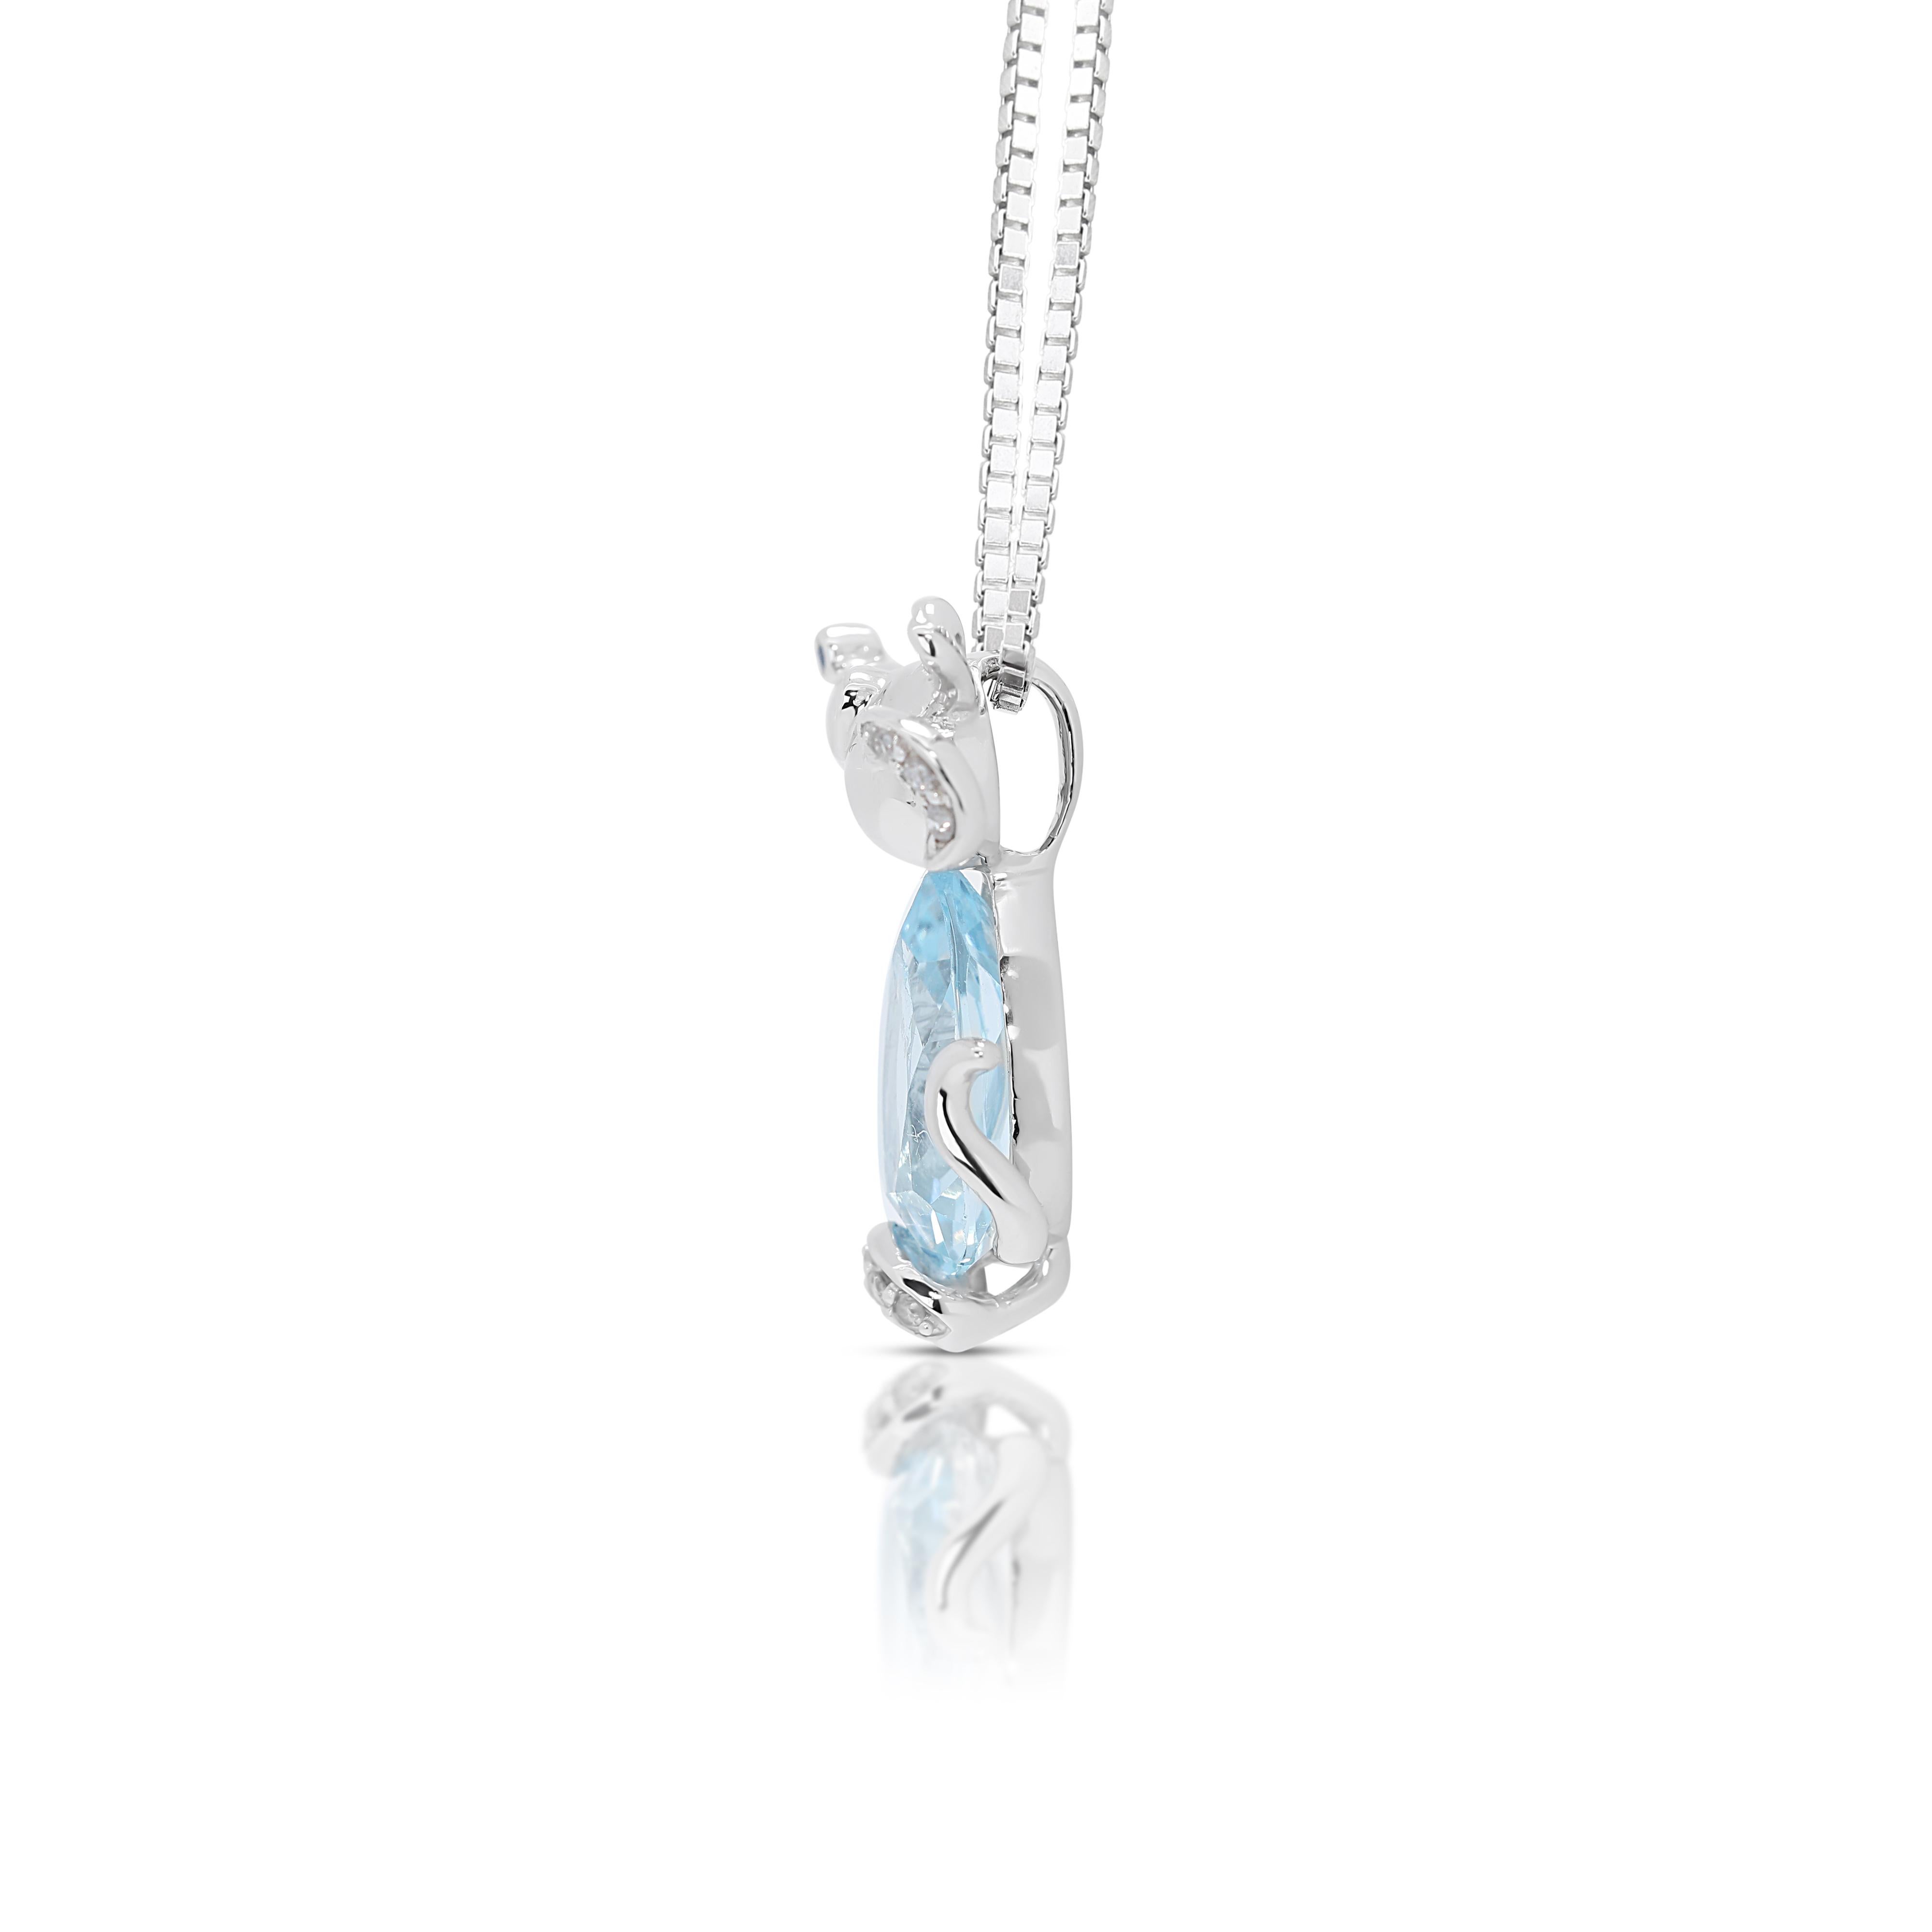 Shining 1.45ct Topaz Pendant w/ Sapphires & Diamonds - (Chain not Included) In Excellent Condition For Sale In רמת גן, IL